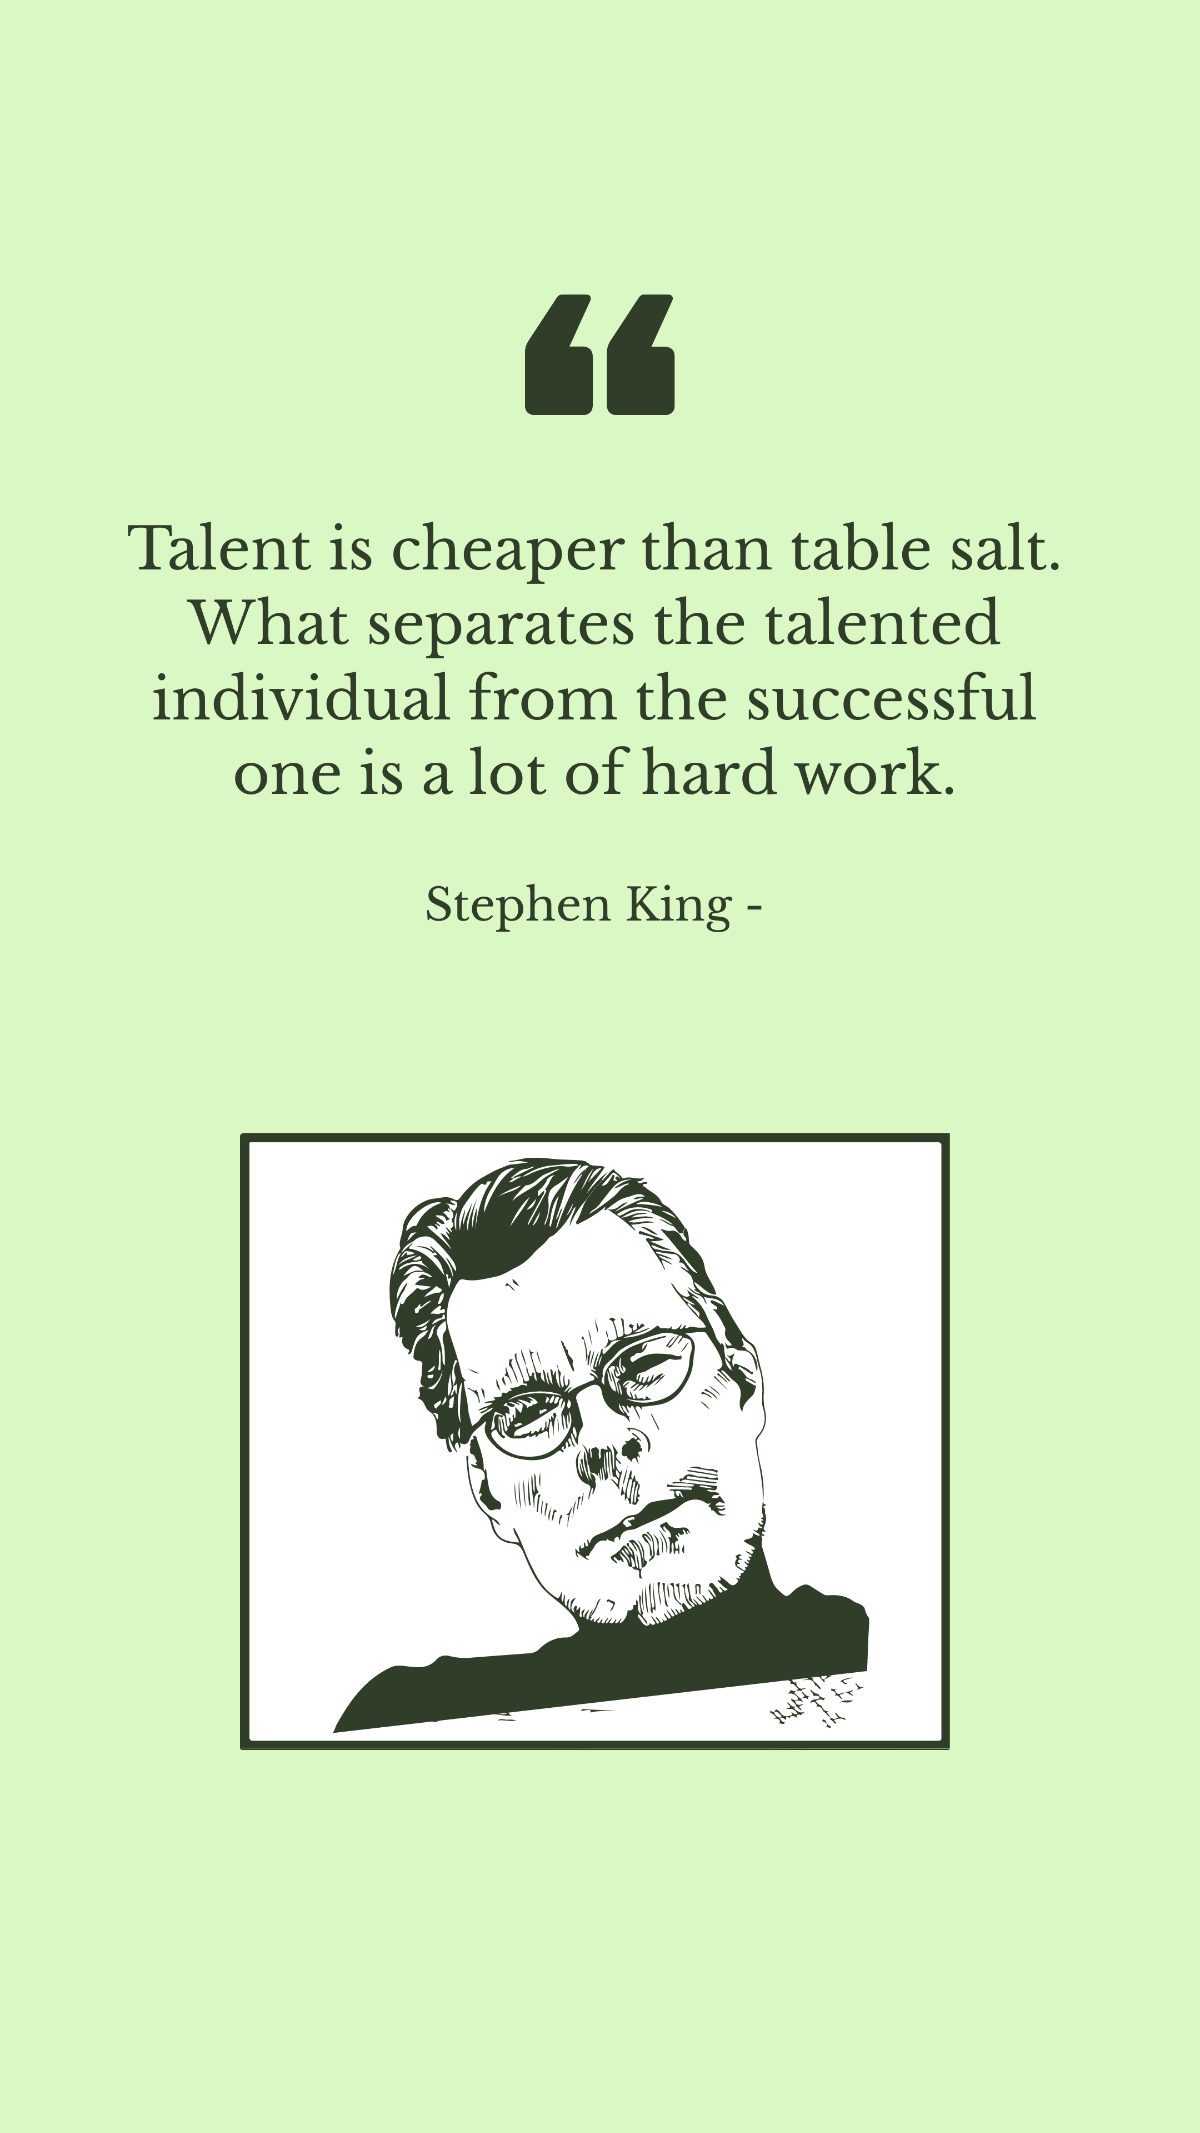 Stephen King - Talent is cheaper than table salt. What separates the talented individual from the successful one is a lot of hard work. Template